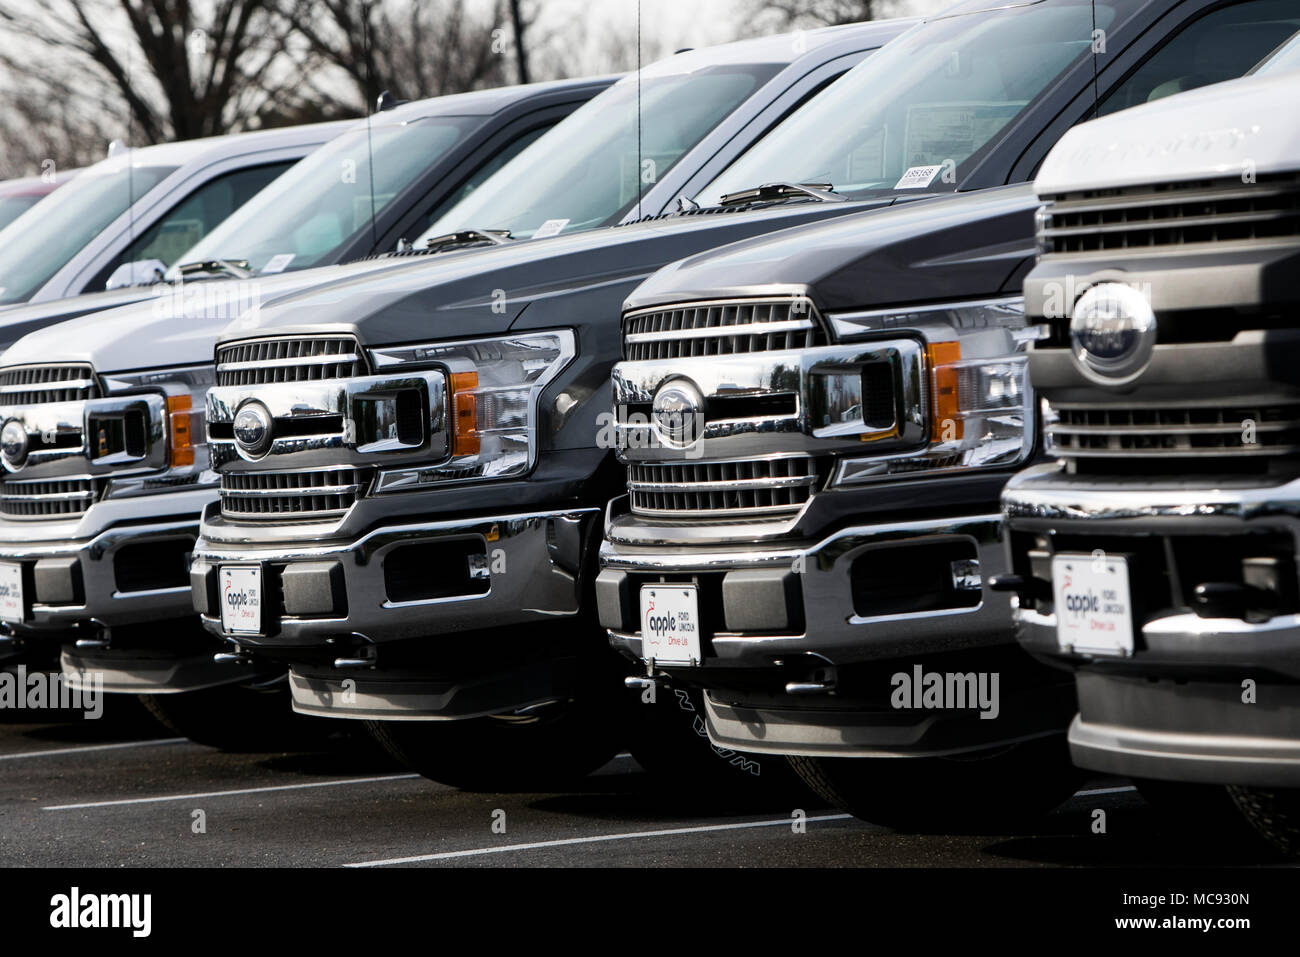 A row of new Ford F-series pick-up trucks at a car dealership in Columbia, Maryland on April 13, 2018. Stock Photo